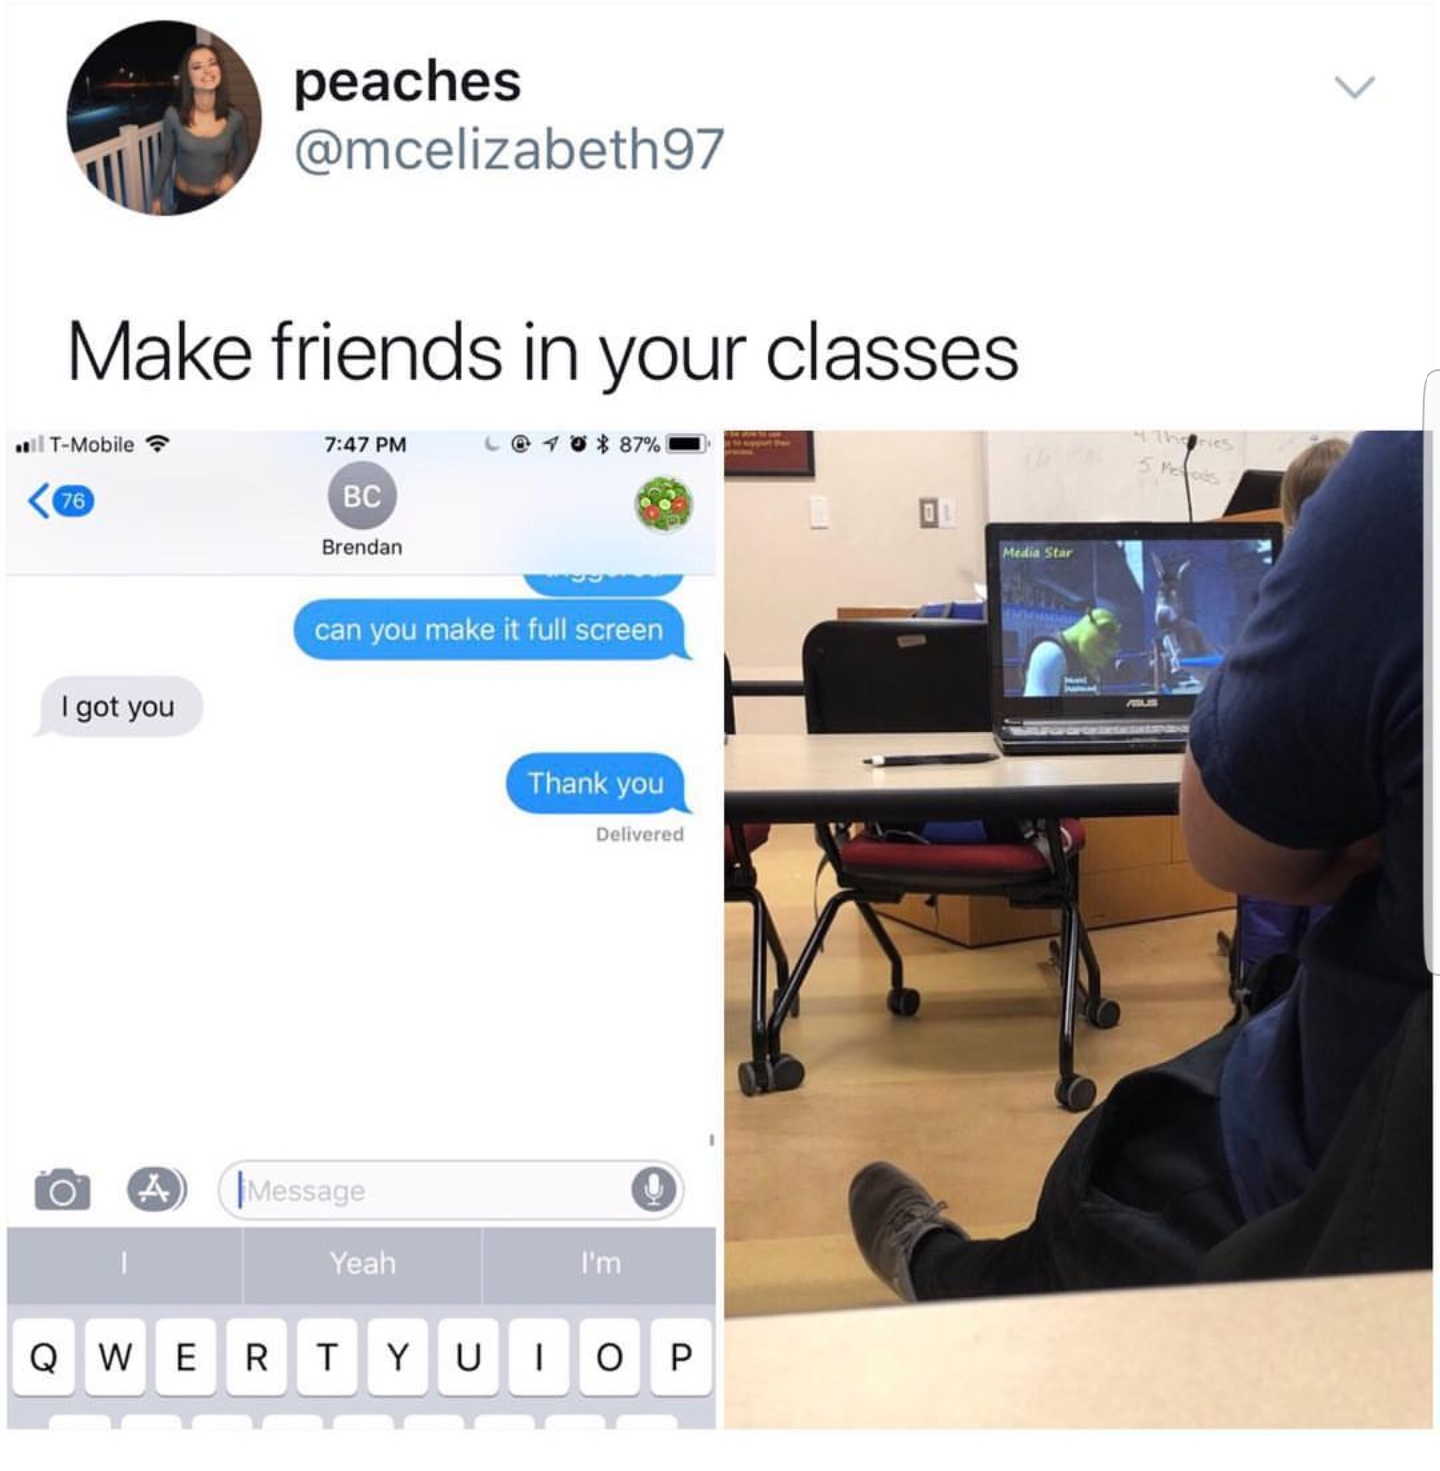 make friends in your classes meme - peaches Make friends in your classes TMobile Bc 90 Brendan can you make it full screen I got you Thank you a se Yeah I'm Qwertyuiop